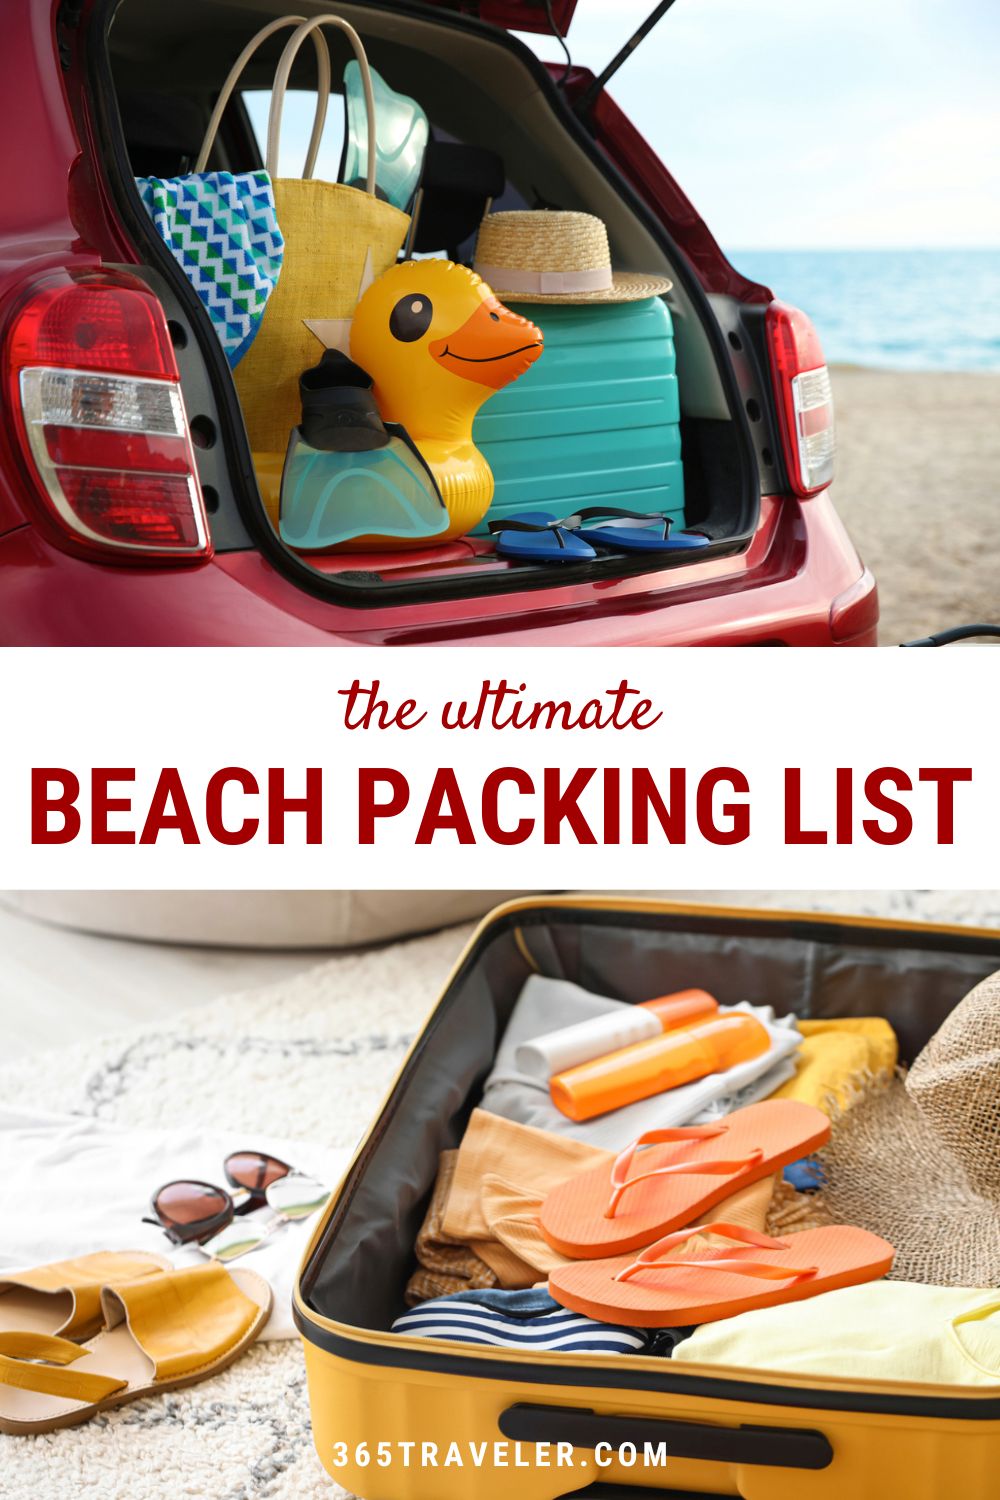 THE ULTIMATE BEACH PACKING LIST FOR YOUR NEXT VACATION